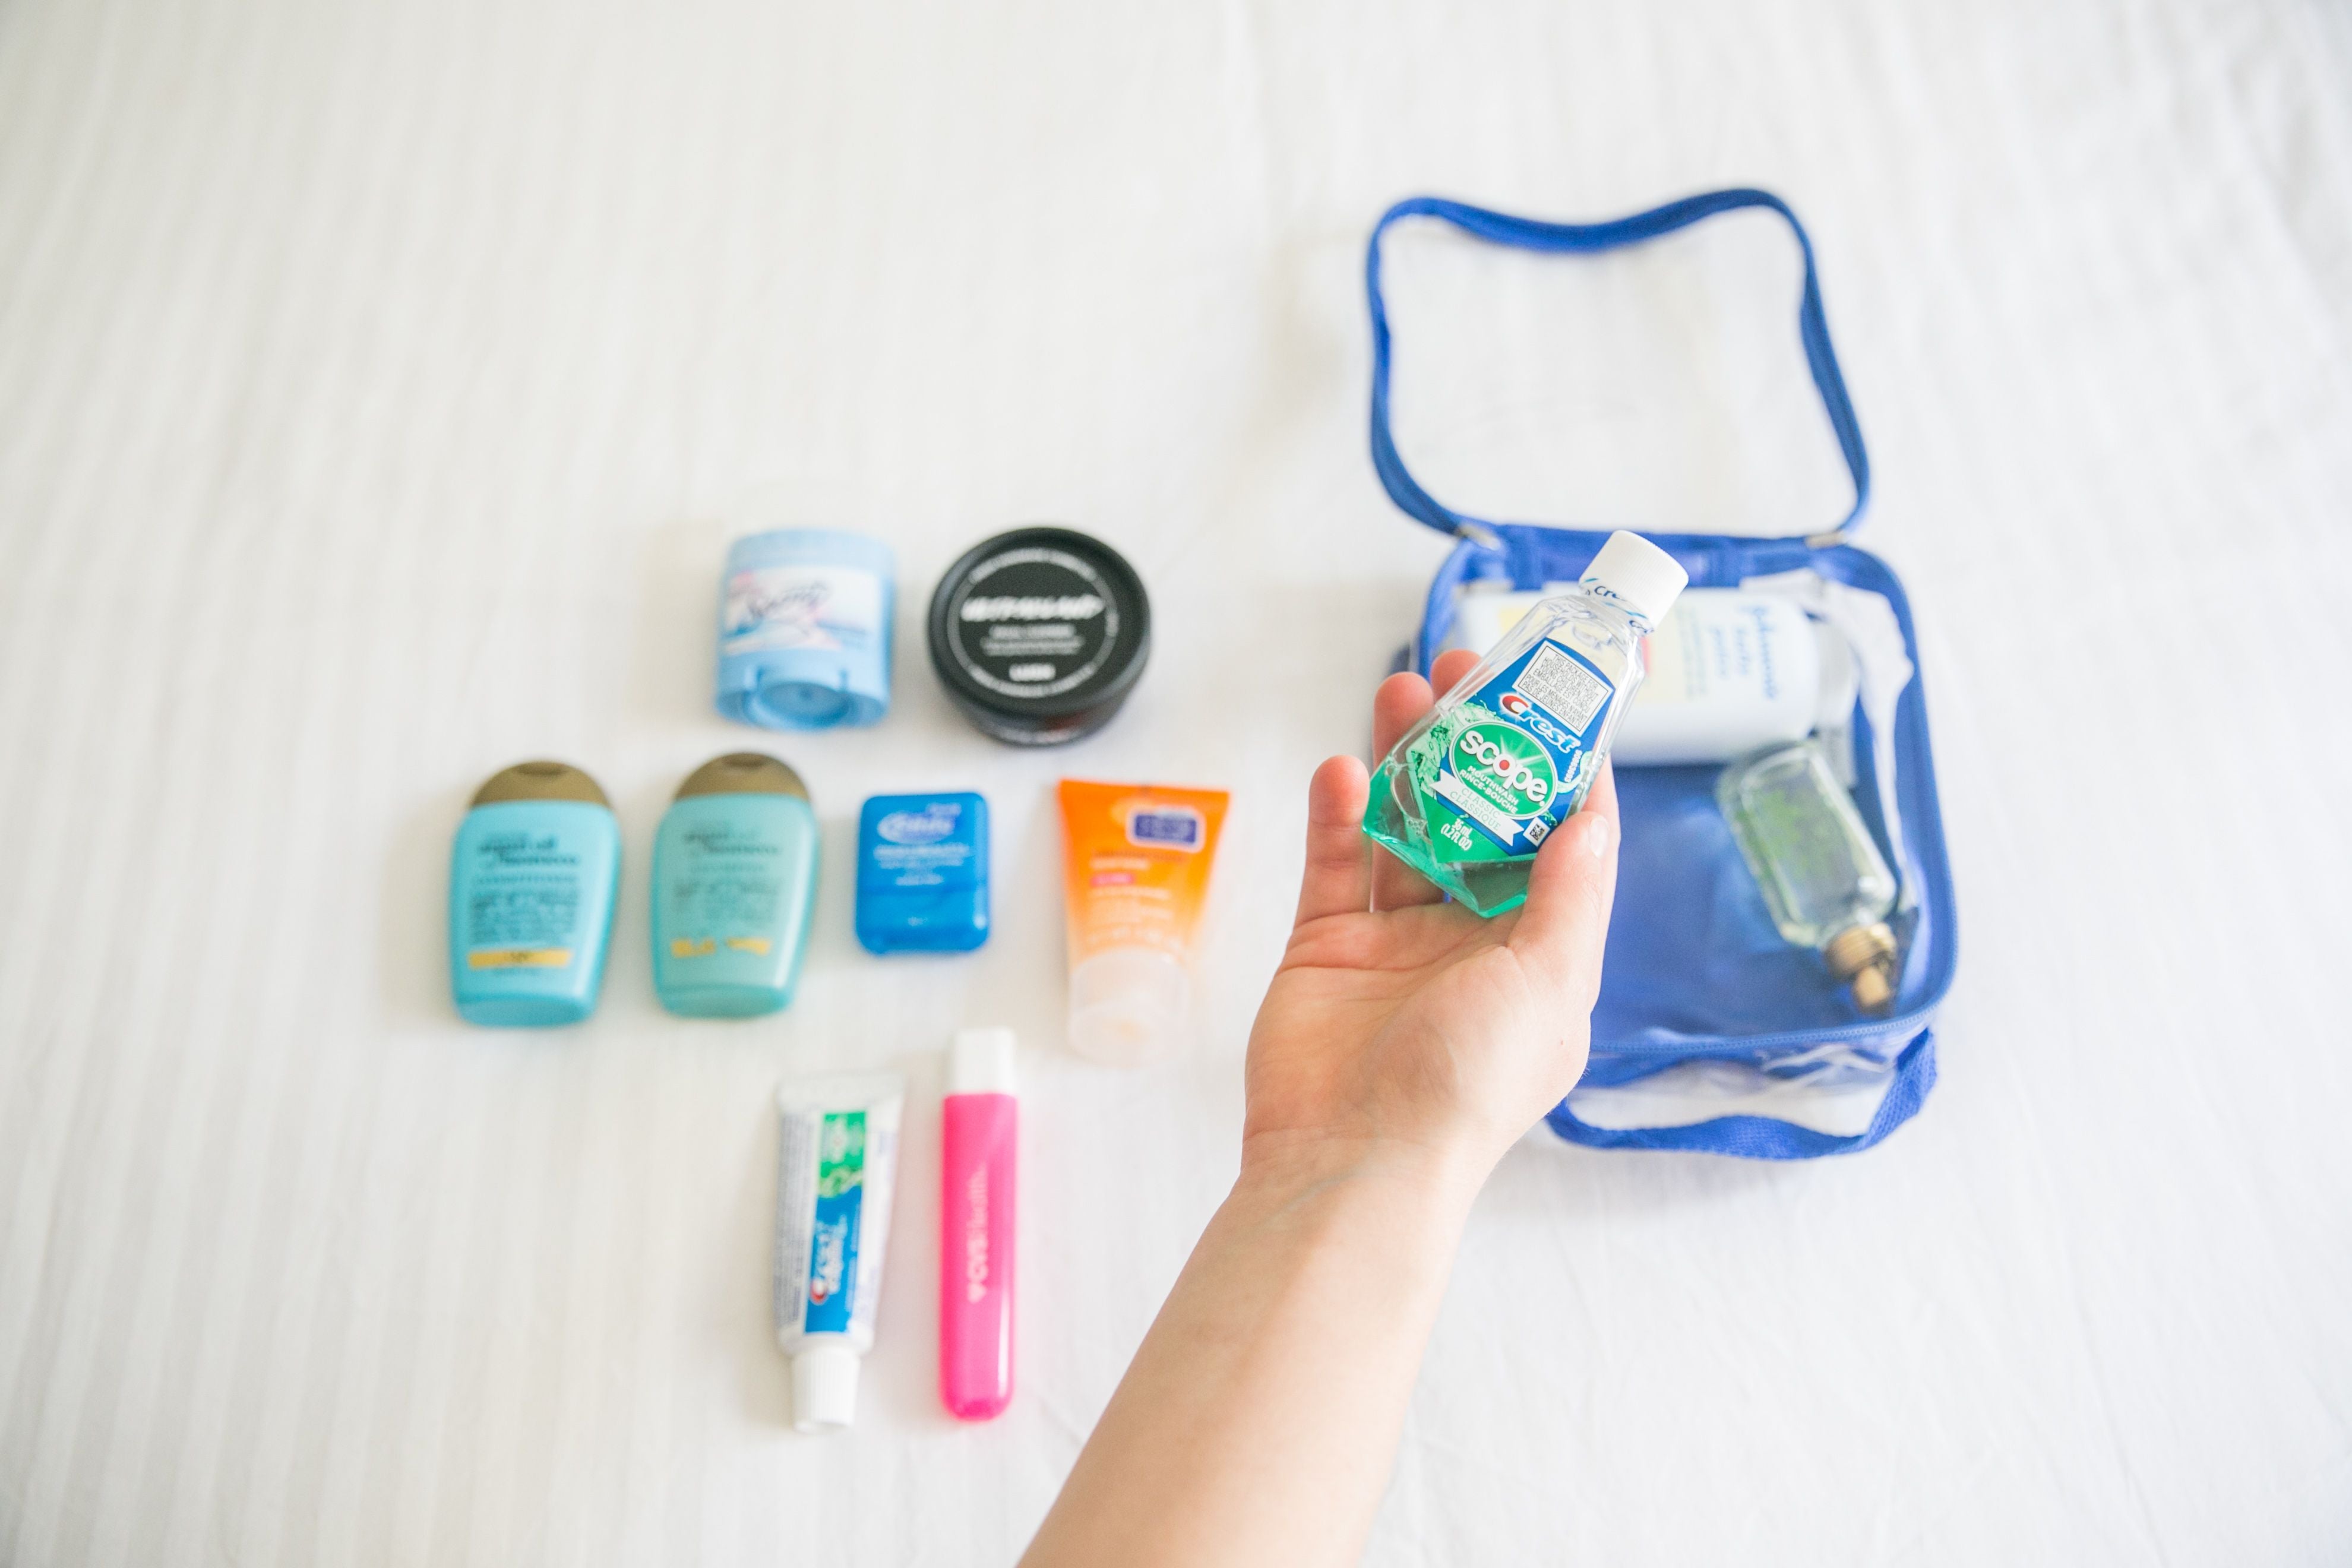 travel size mouthwash and other toiletries in an extra small cube